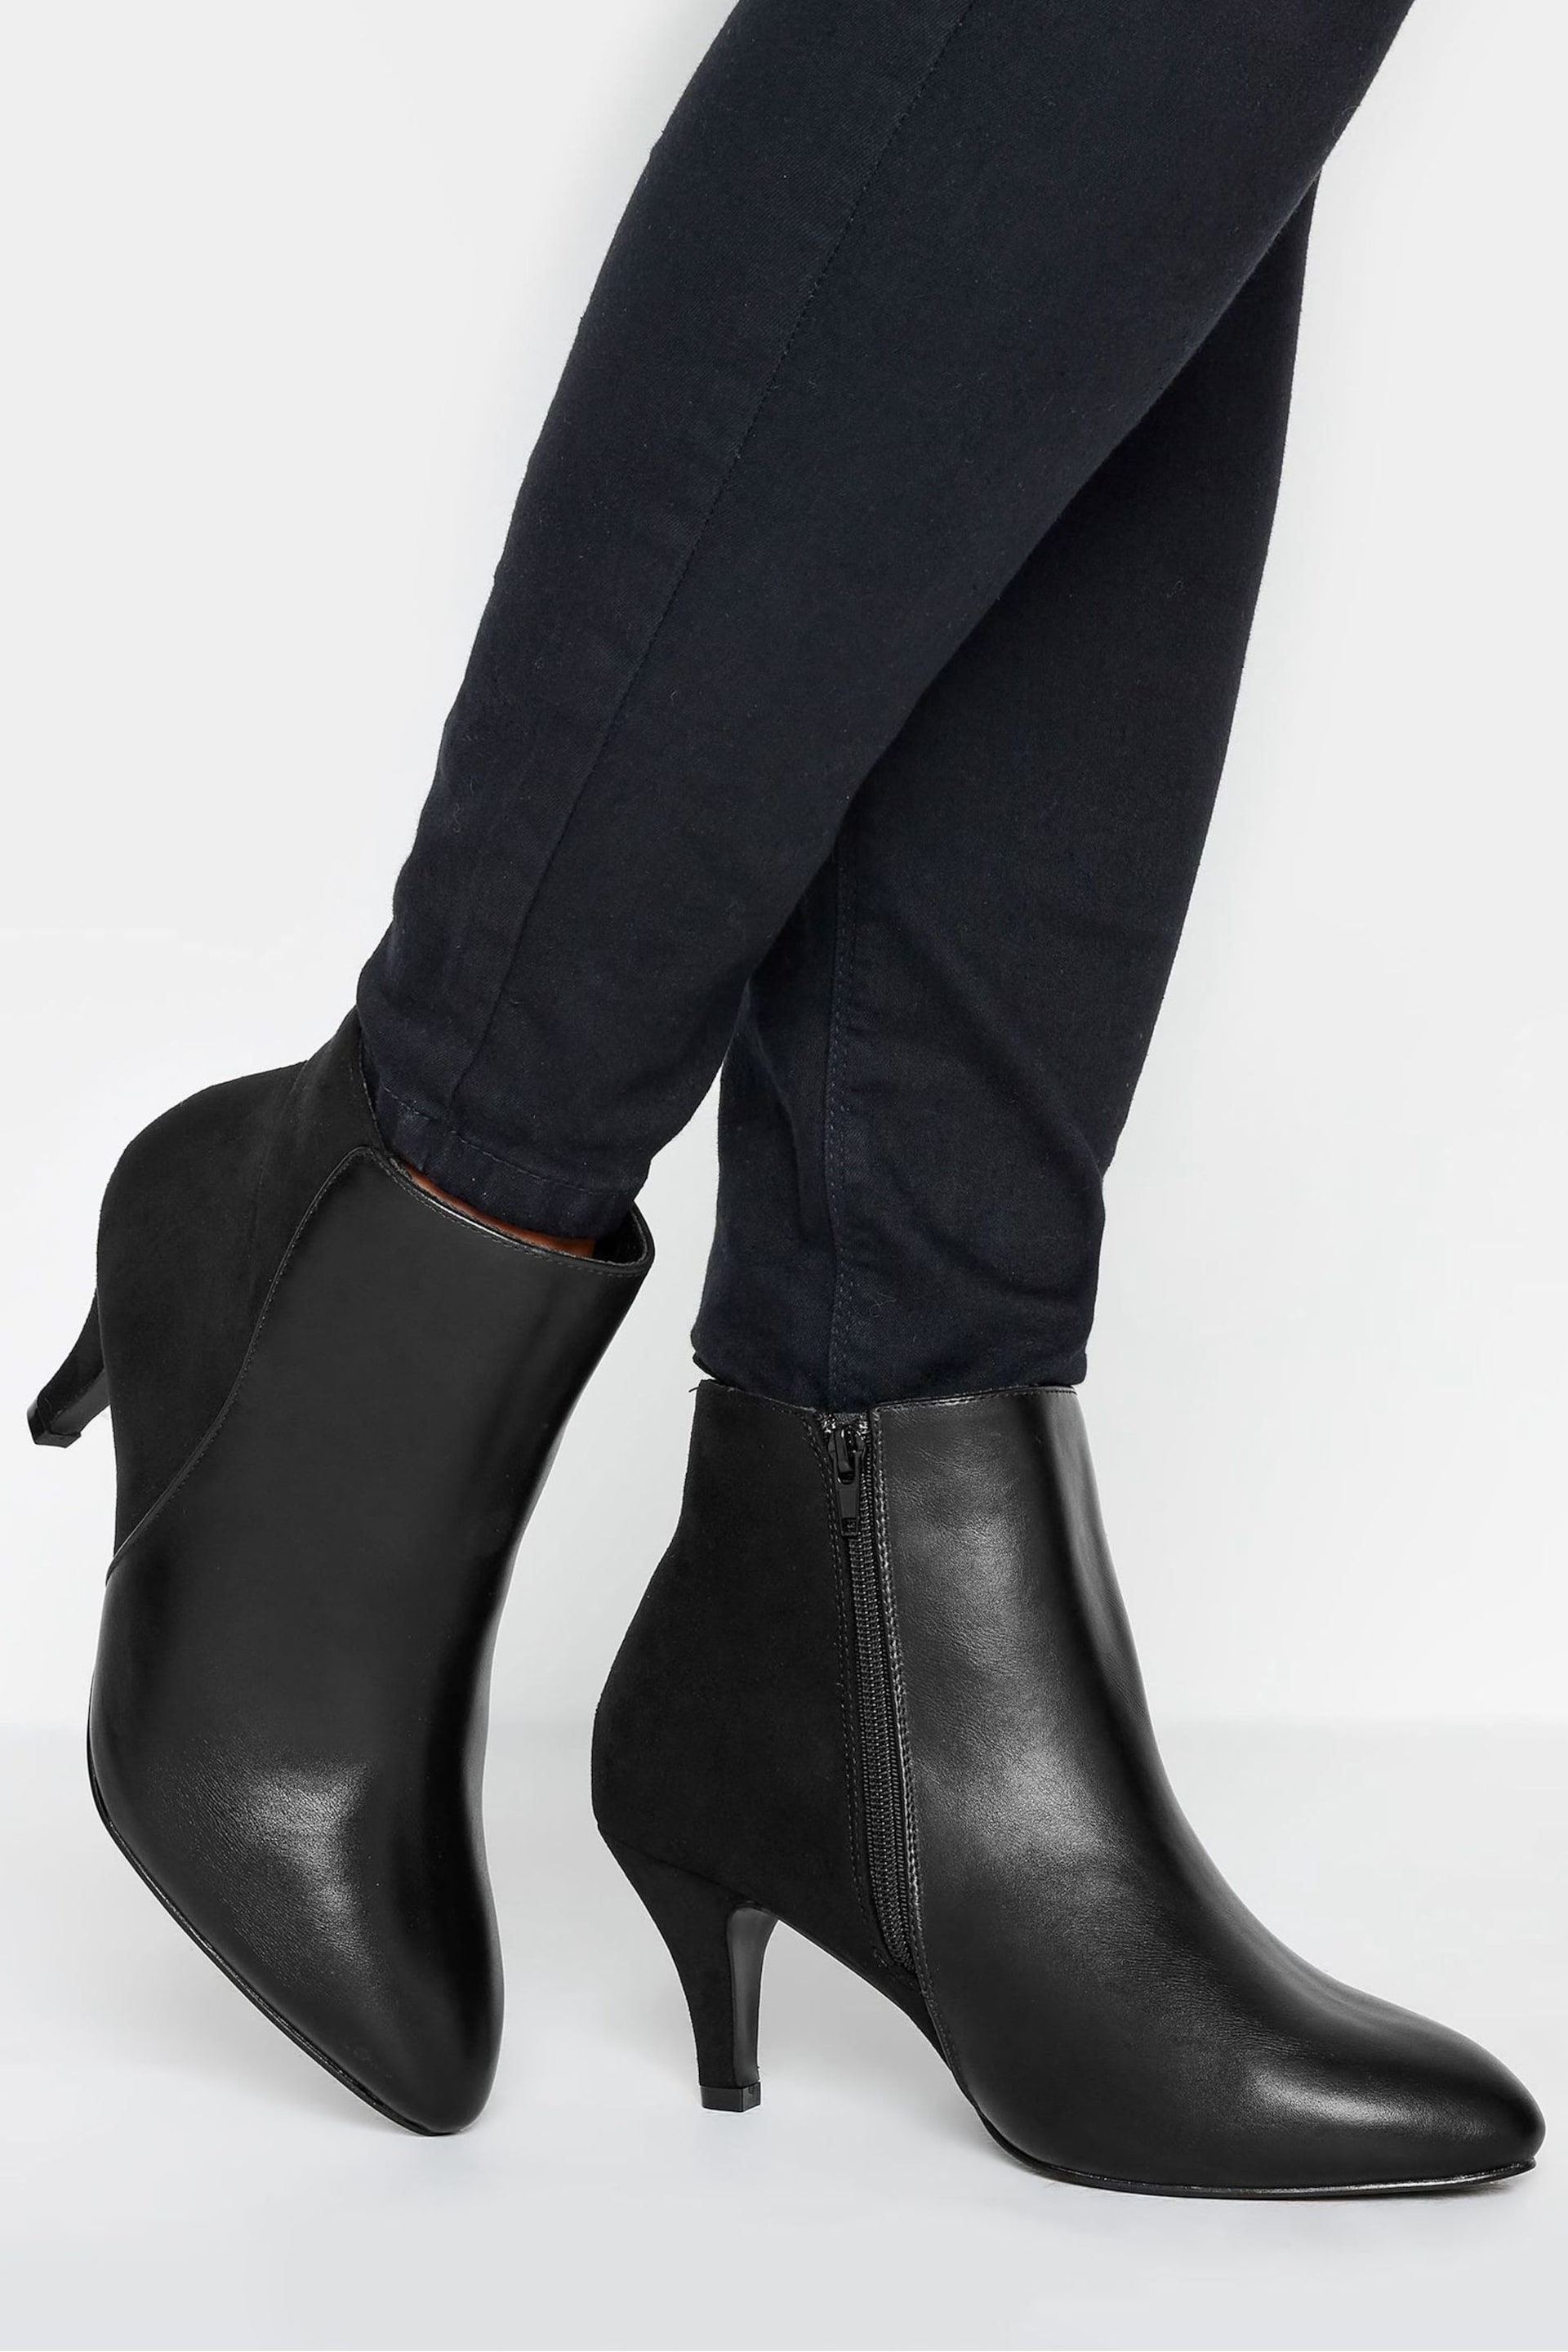 Yours Curve Black Extra Wide Fit Shoes Boots - Image 1 of 5